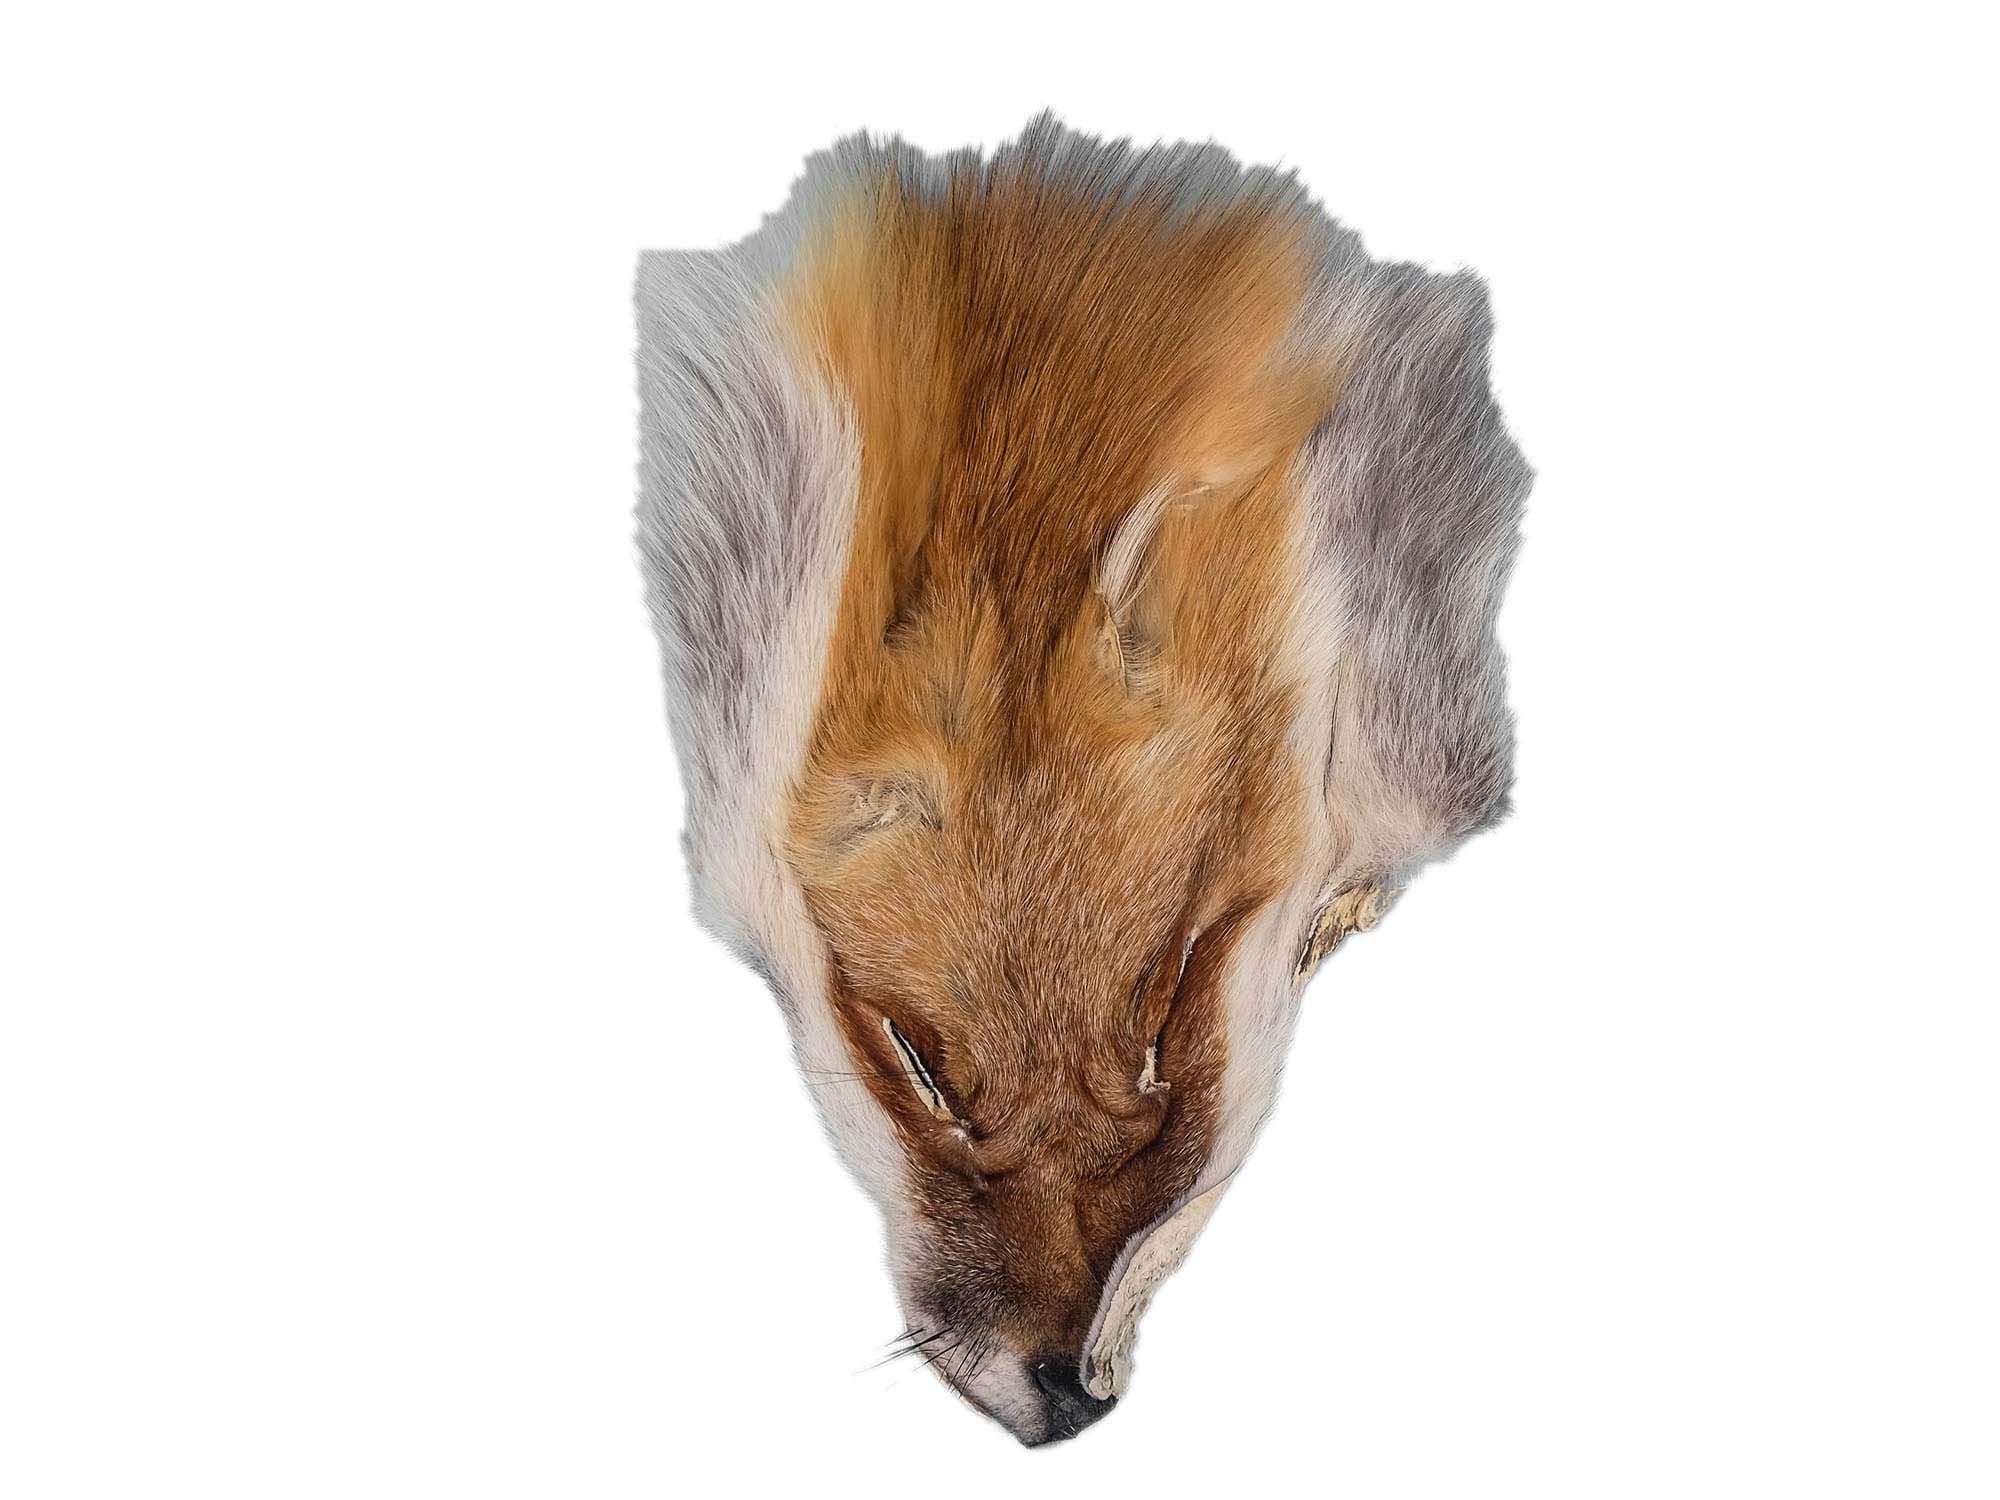 Red Fox Face: #3 